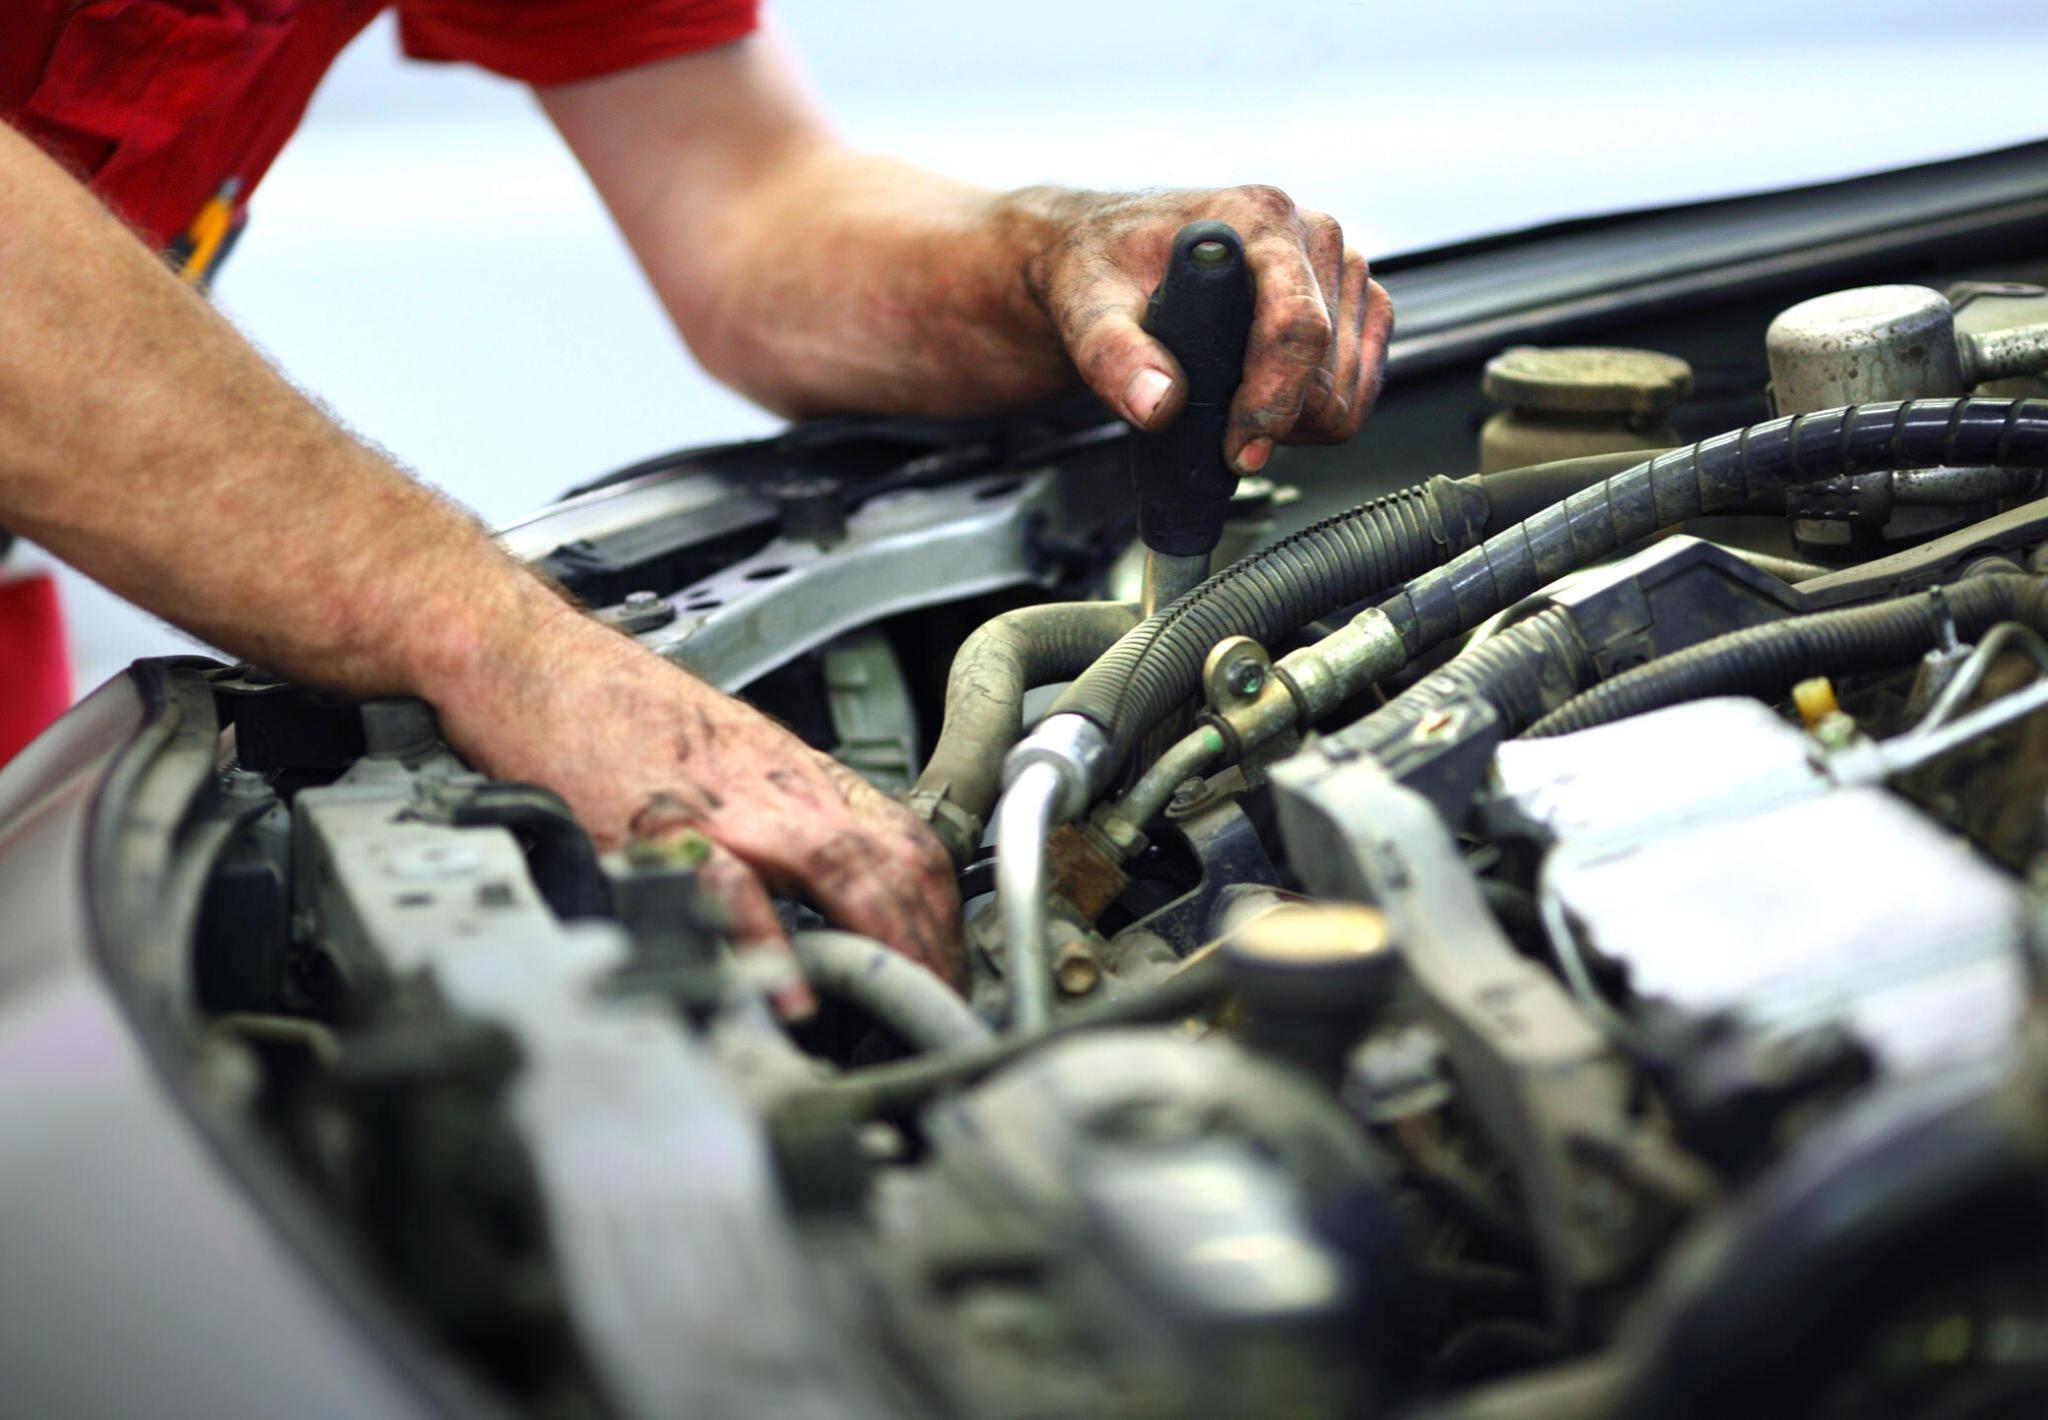 Best Car Check Hoses Services In Texas- Express Auto Irving